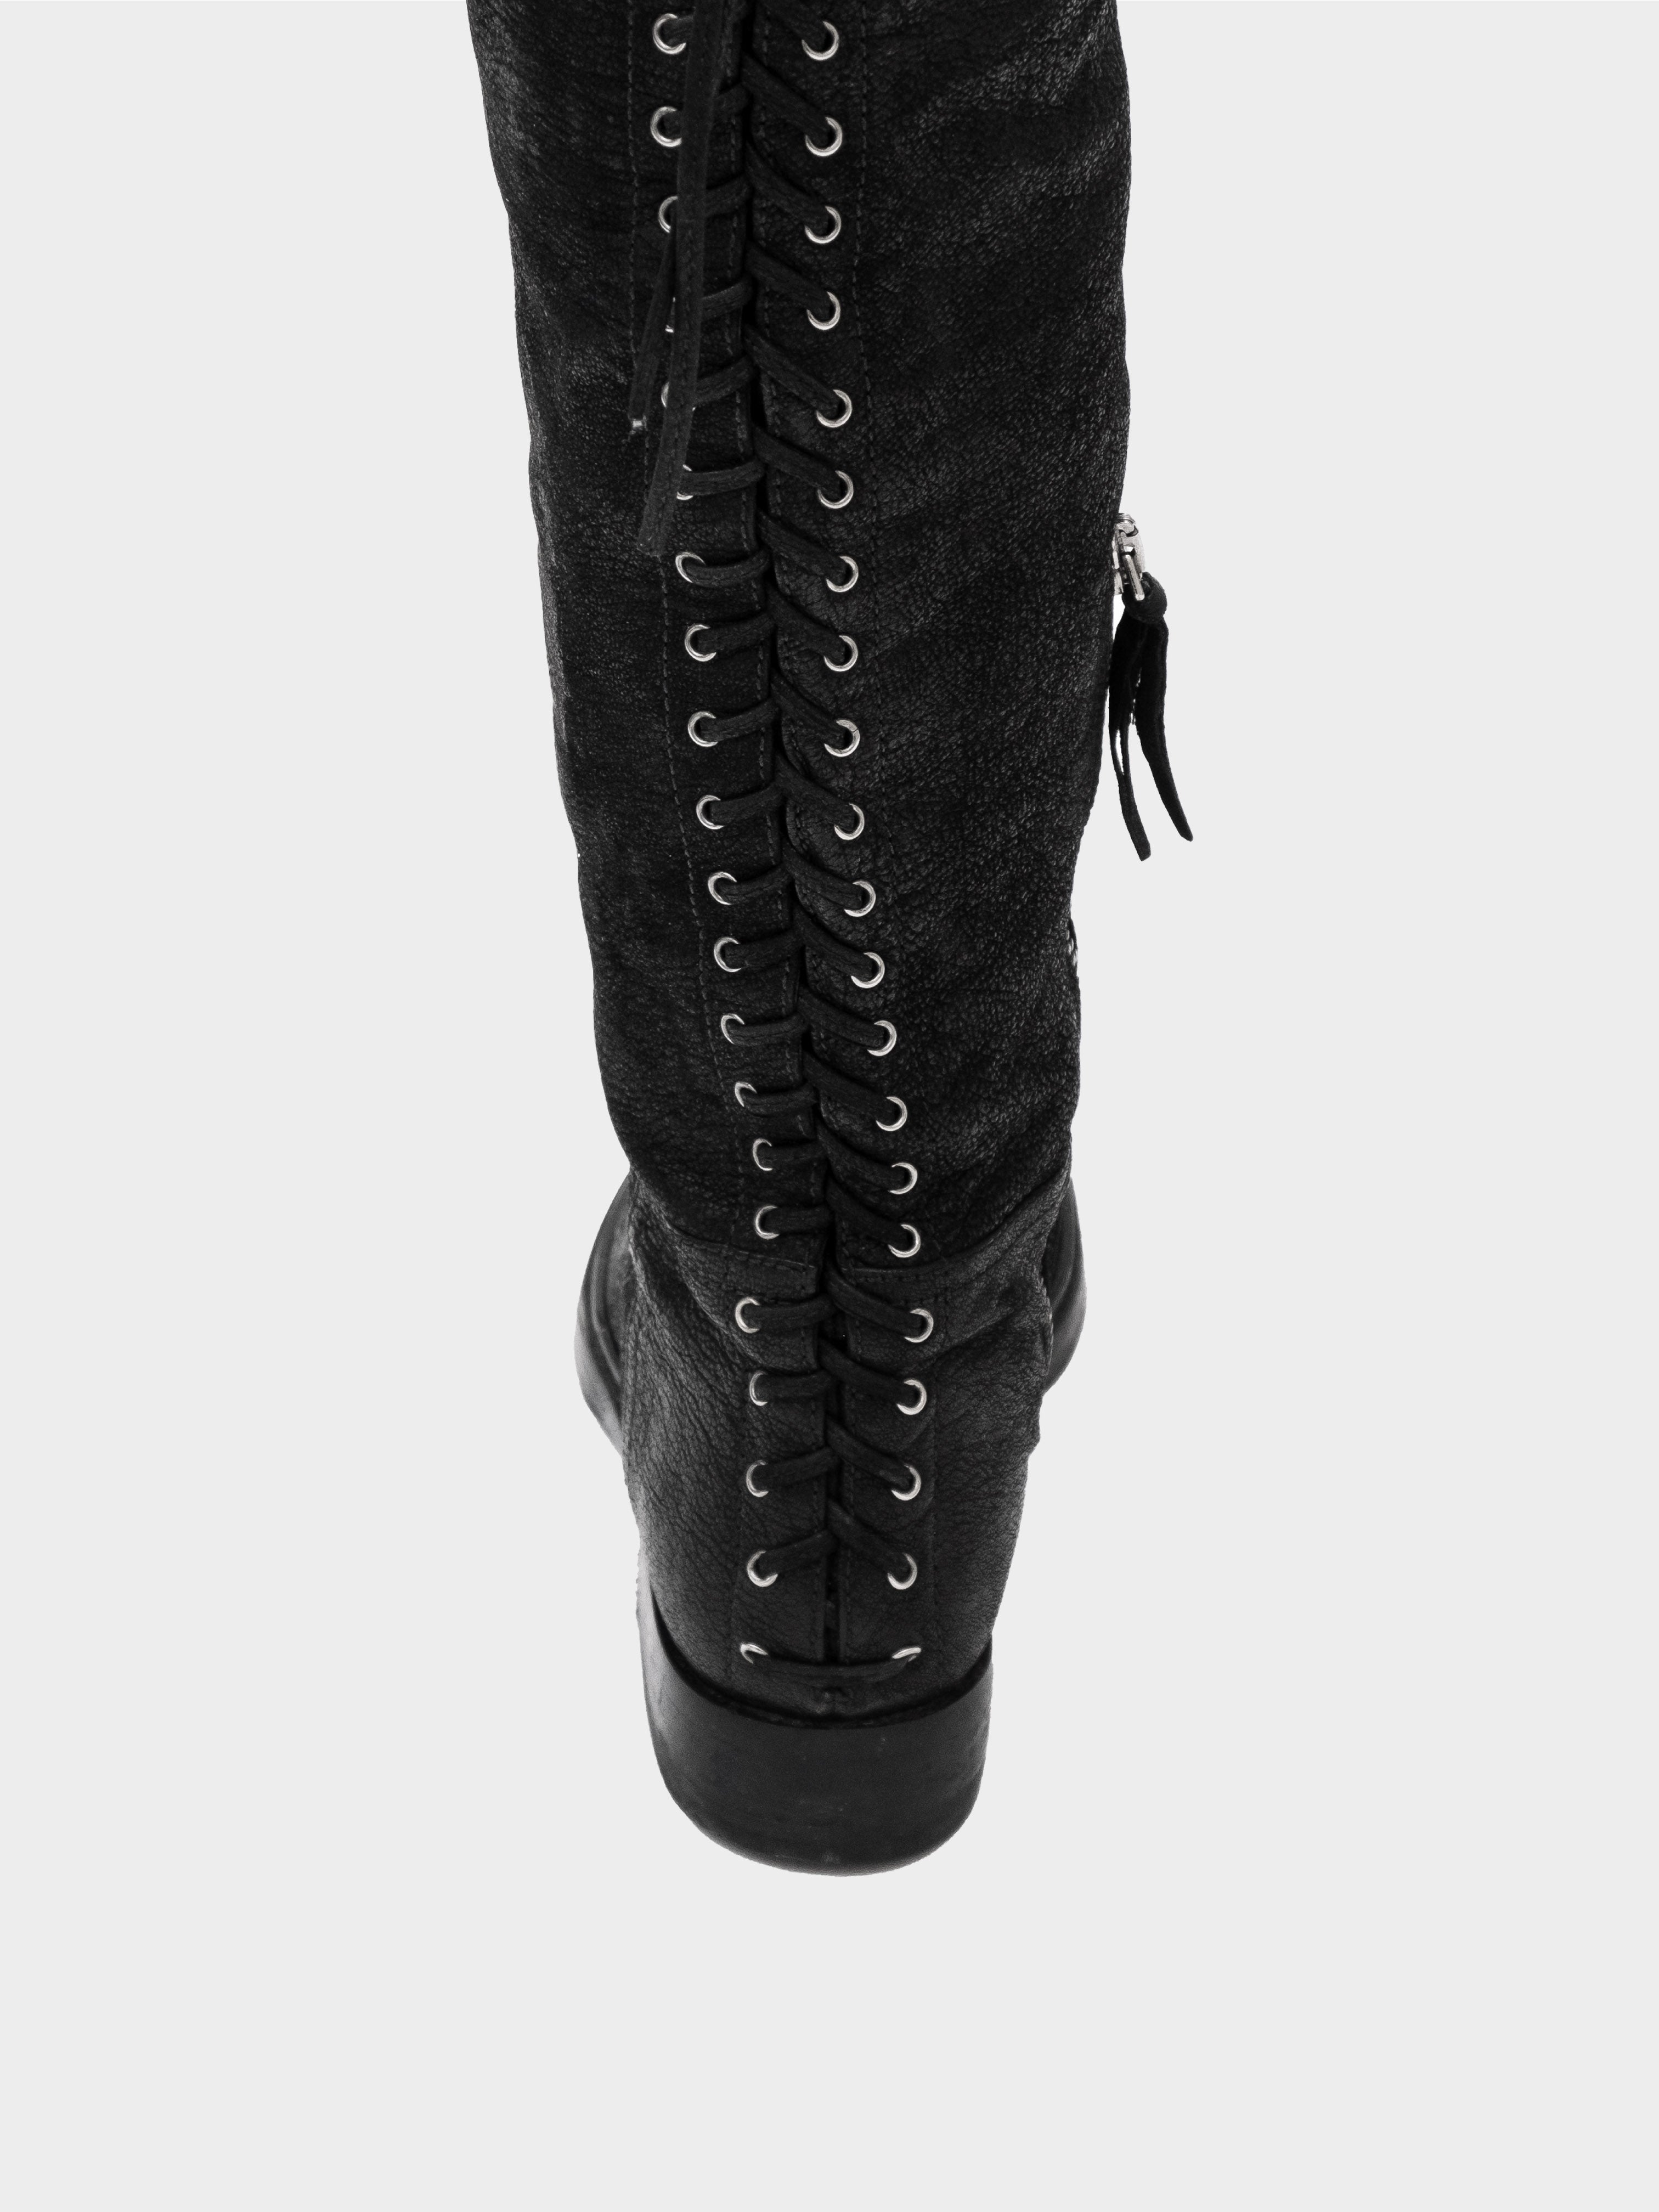 Miu Miu Early 2000s Overknee Lace-Up Leather Boots